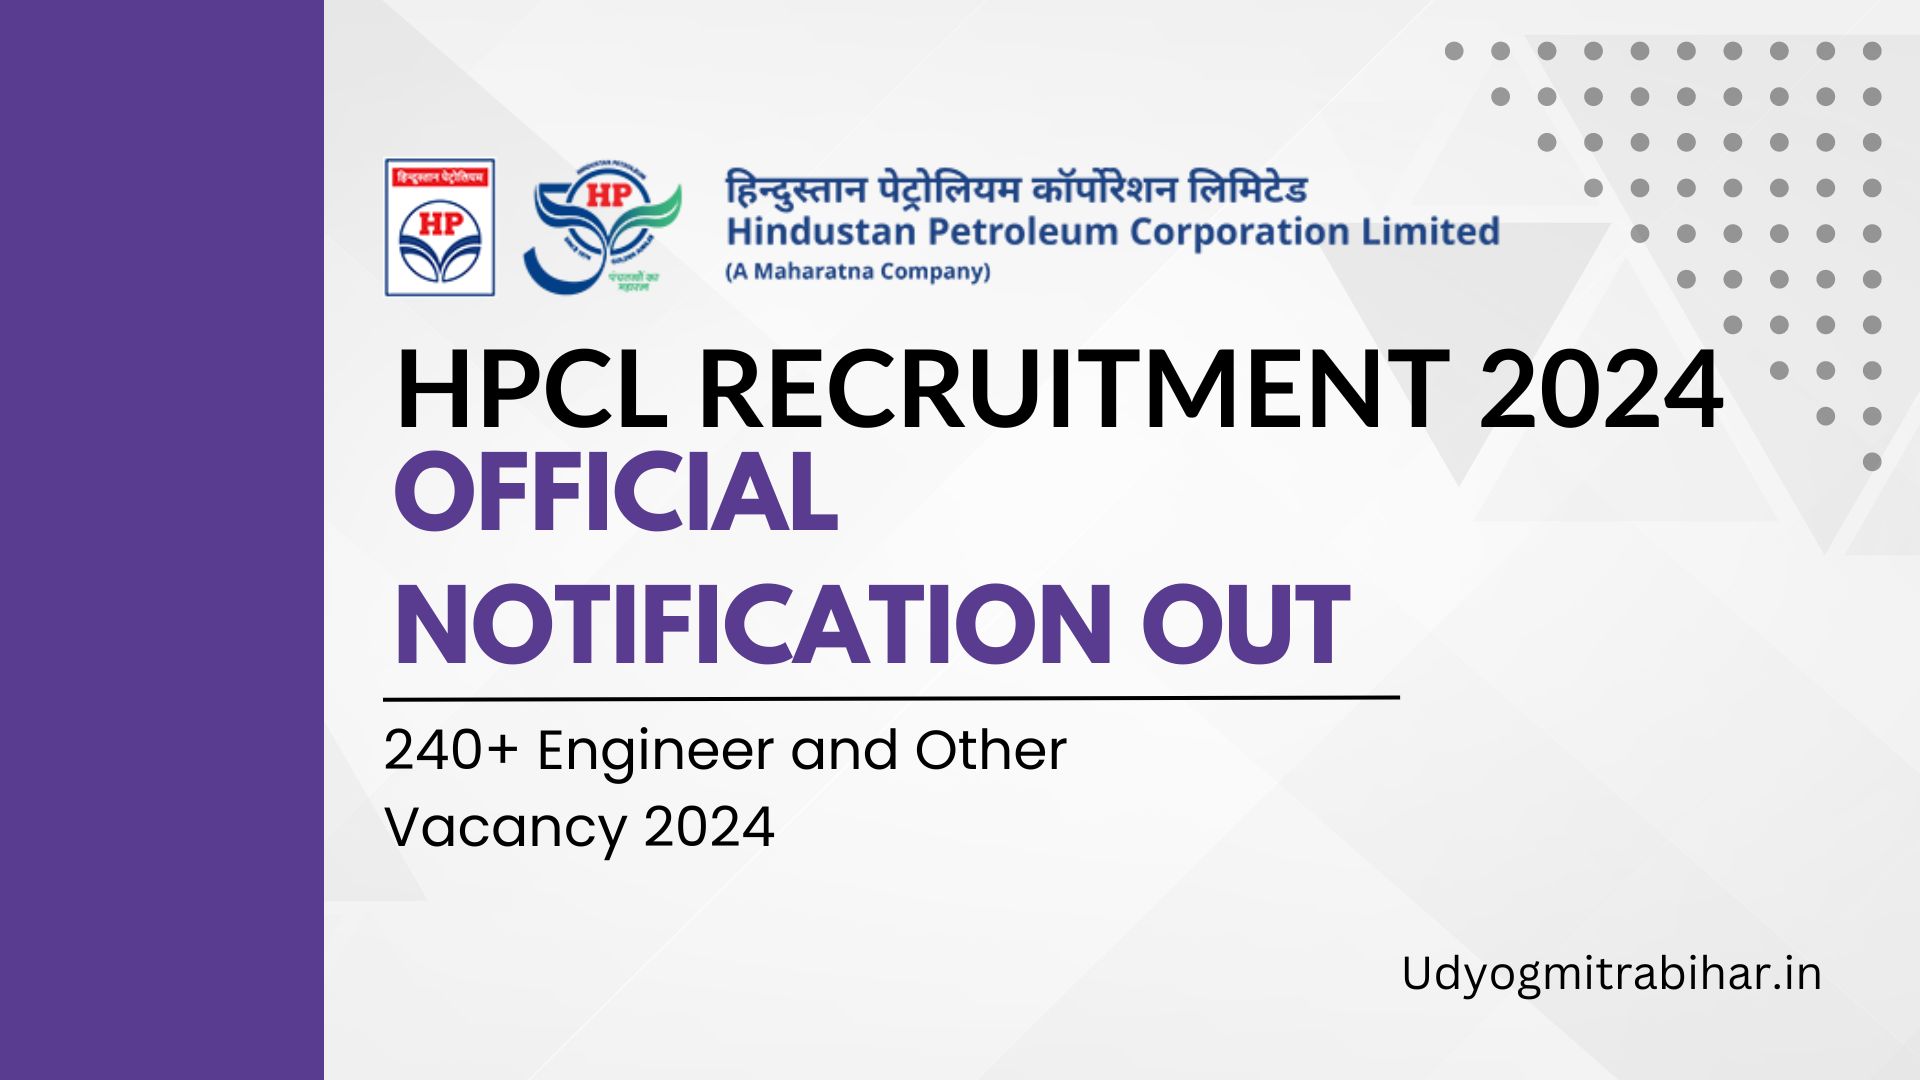 HPCL Recruitment 2024 Official Notification Out, 240+ Engineer and Other Vacancy, Apply Now, Eligibility, Salary